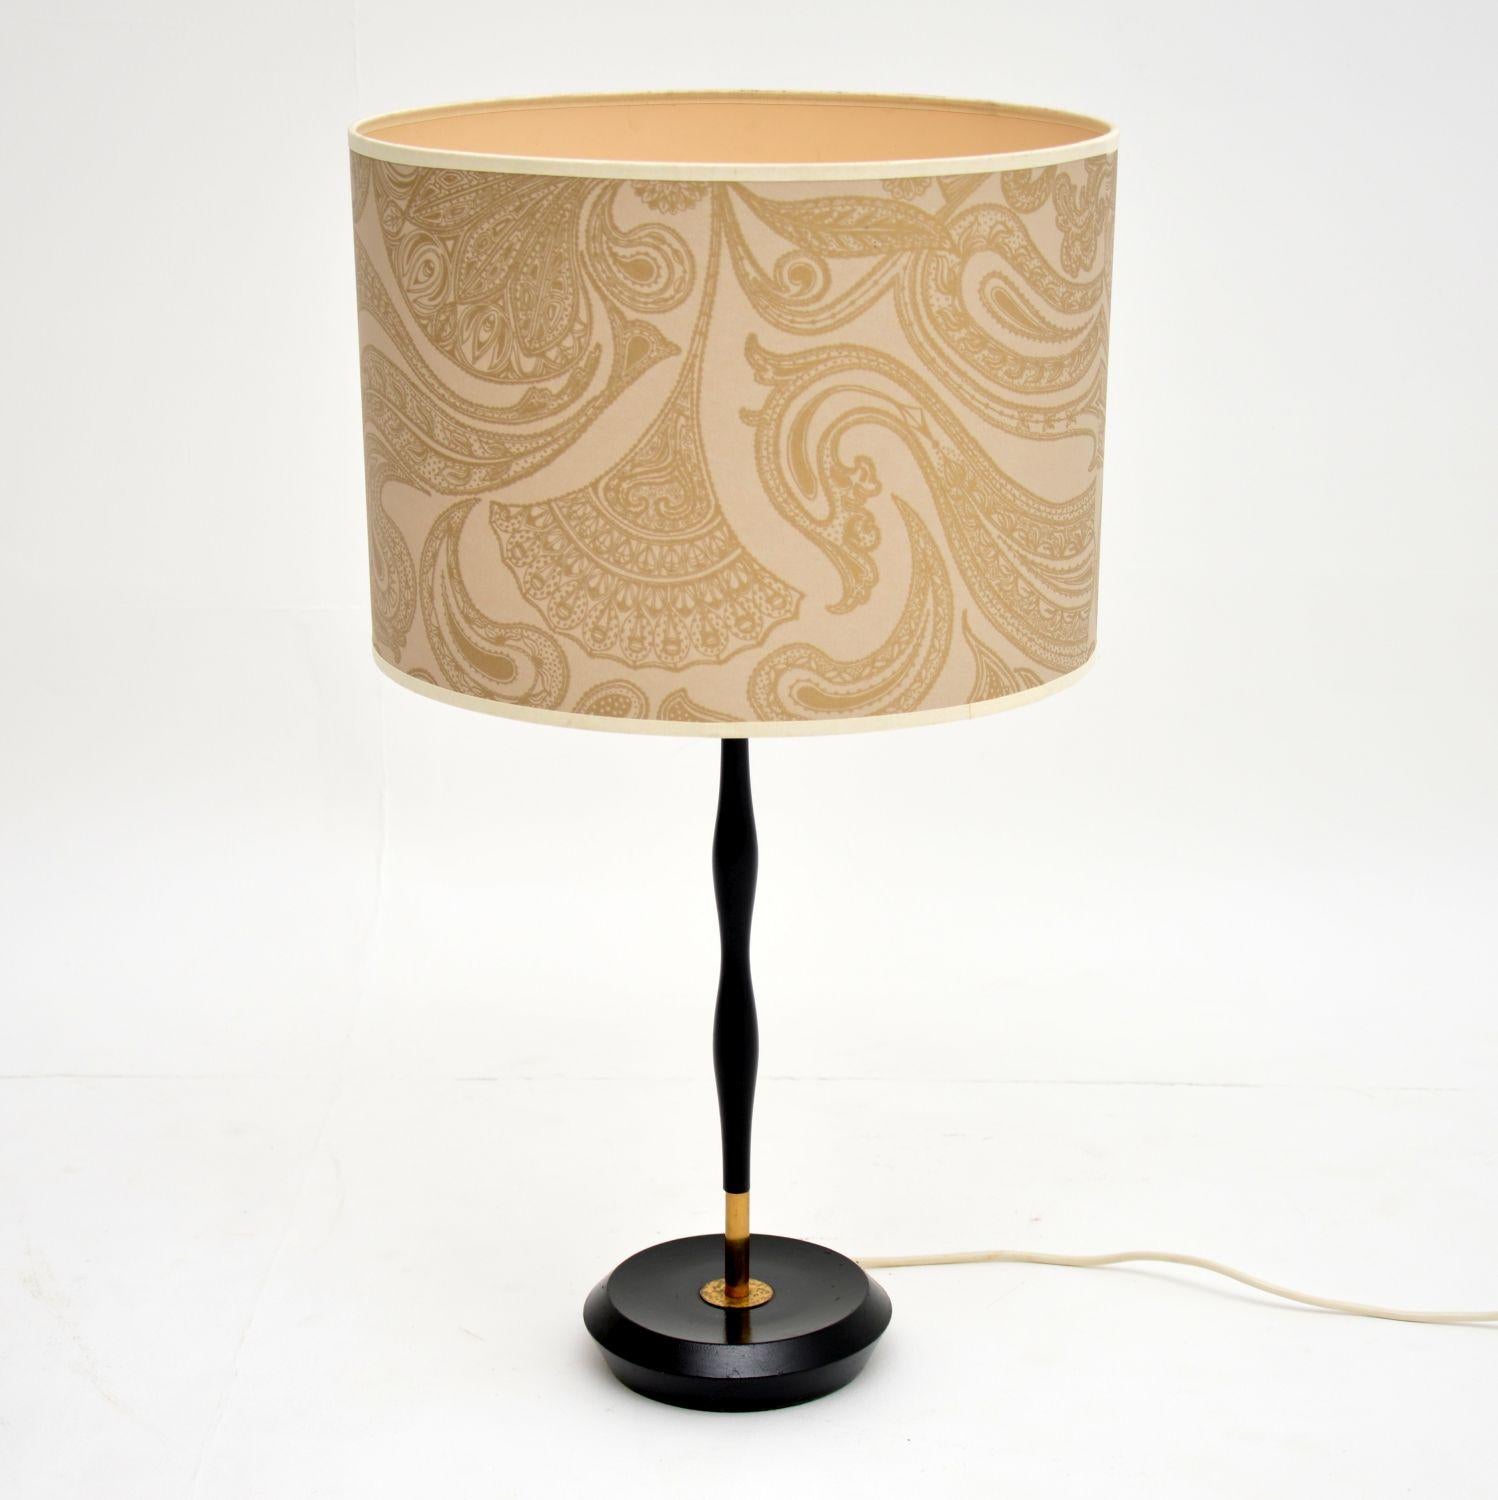 A beautifully styled vintage table lamp in ebonized wood, with brass accents. This is of great quality; it dates from the 1960s. The condition is very good for its age, with just some minor surface wear here and there. This is in good working order,